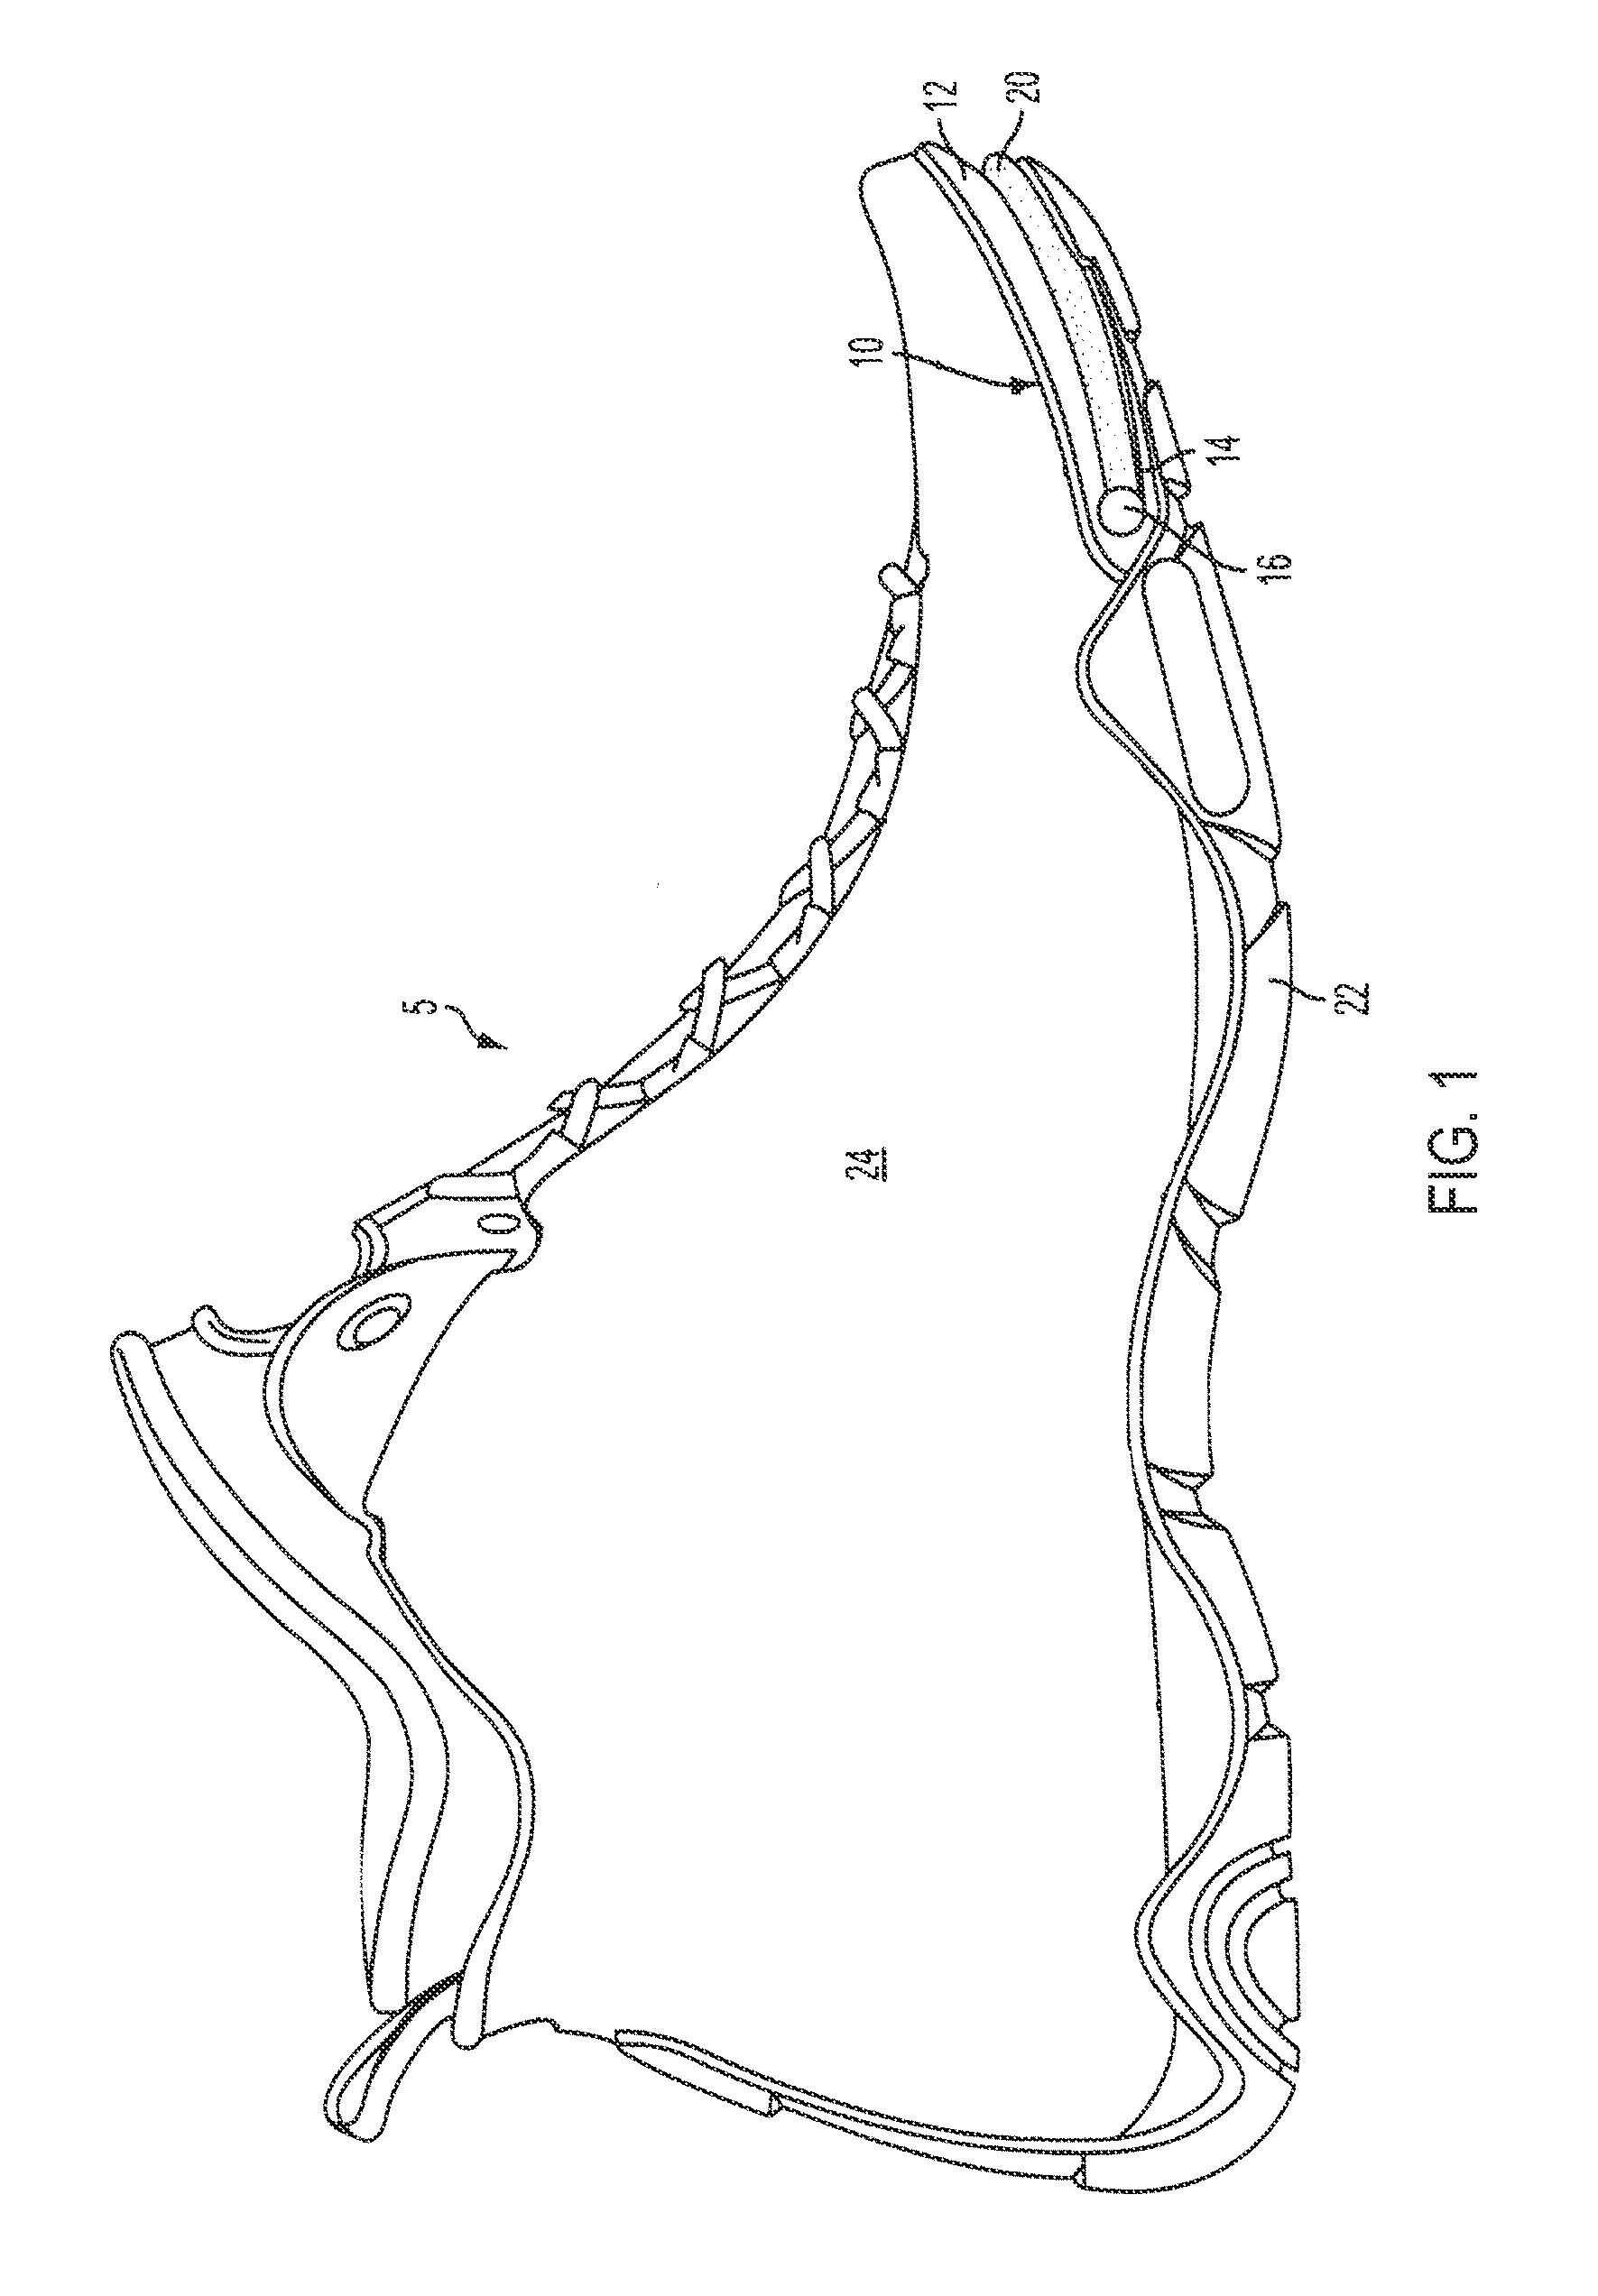 Shoes, devices for shoes, and methods of using shoes